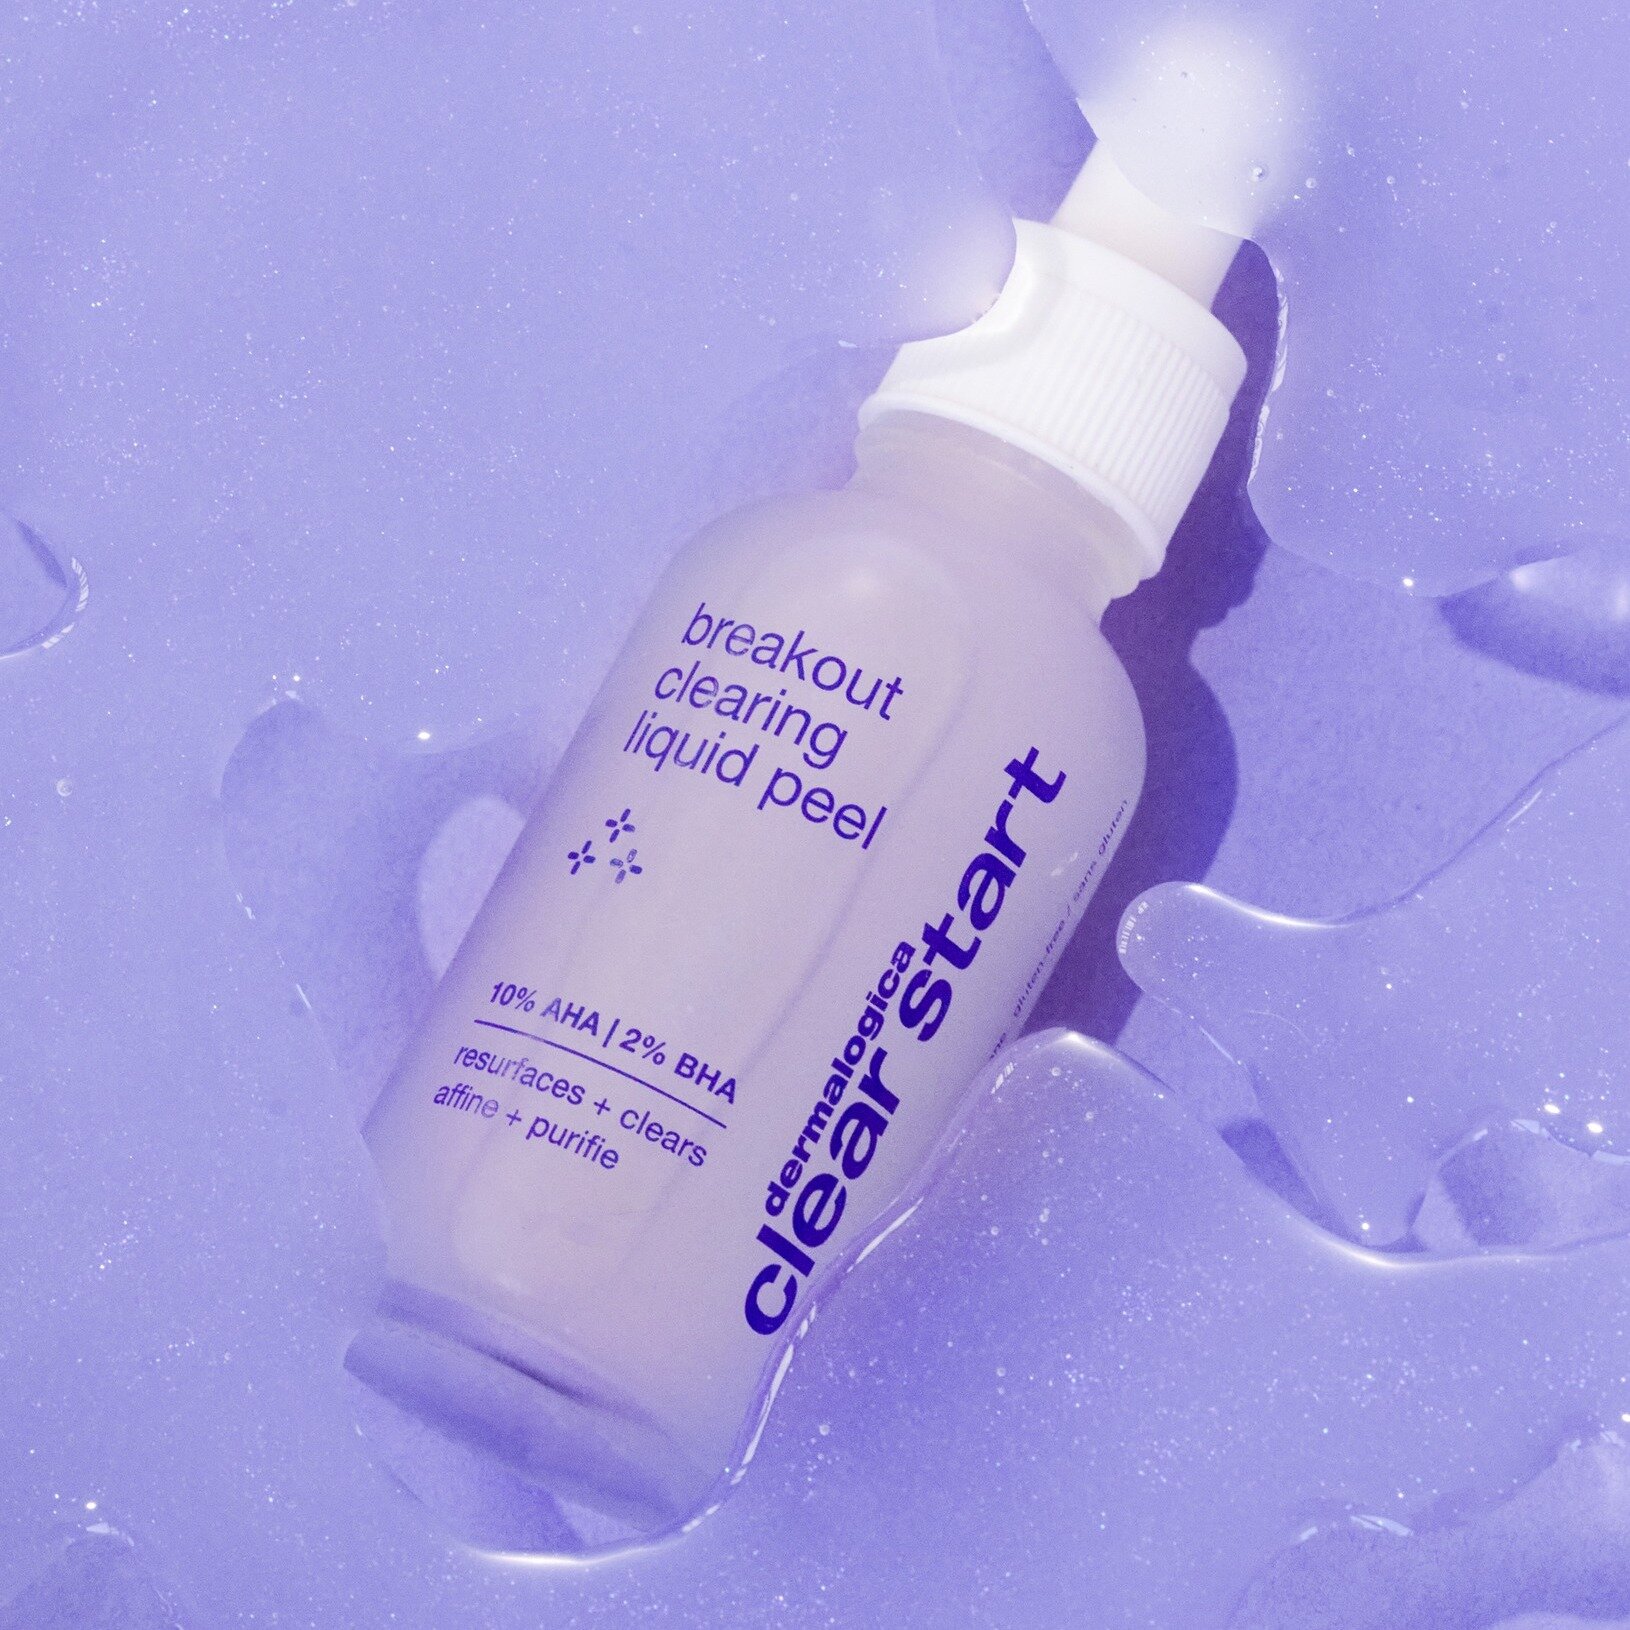 Dermalogica Breakout Clearing Liquid Peel!

An AHA/BHA exfoliating peel that combats active breakouts and resurfaces skin for a smoother brighter more even skin tone.
Containing these amazing active ingredients, Salicylic Acid (stimulates natural exf